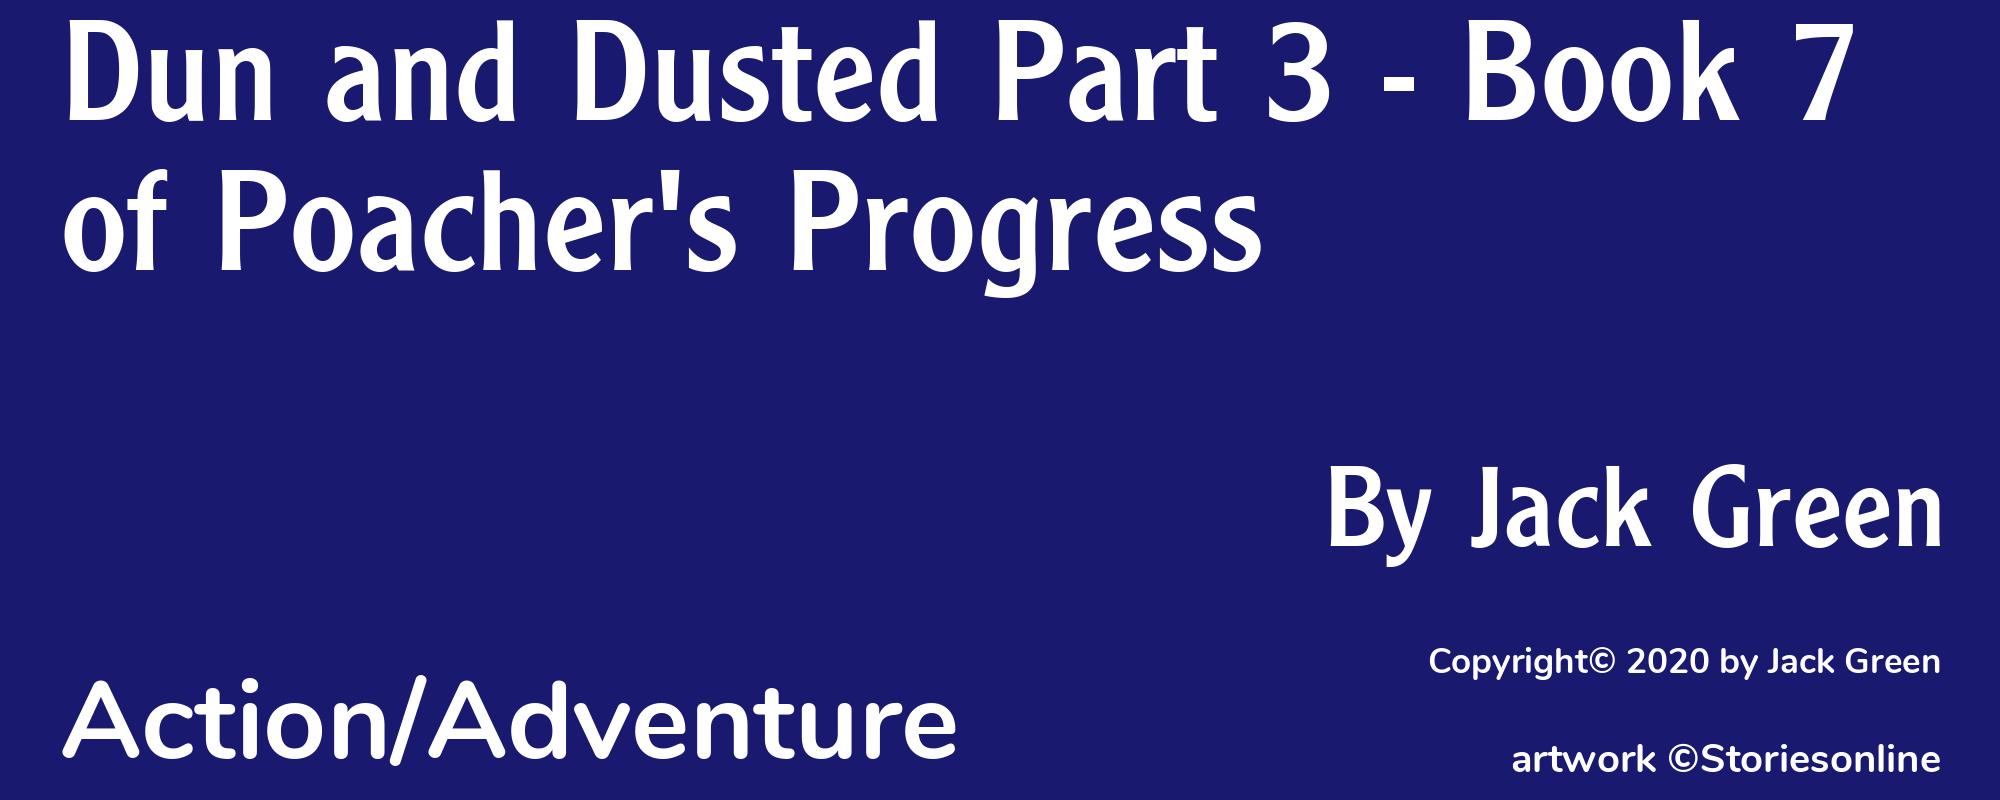 Dun and Dusted Part 3 - Book 7 of Poacher's Progress - Cover